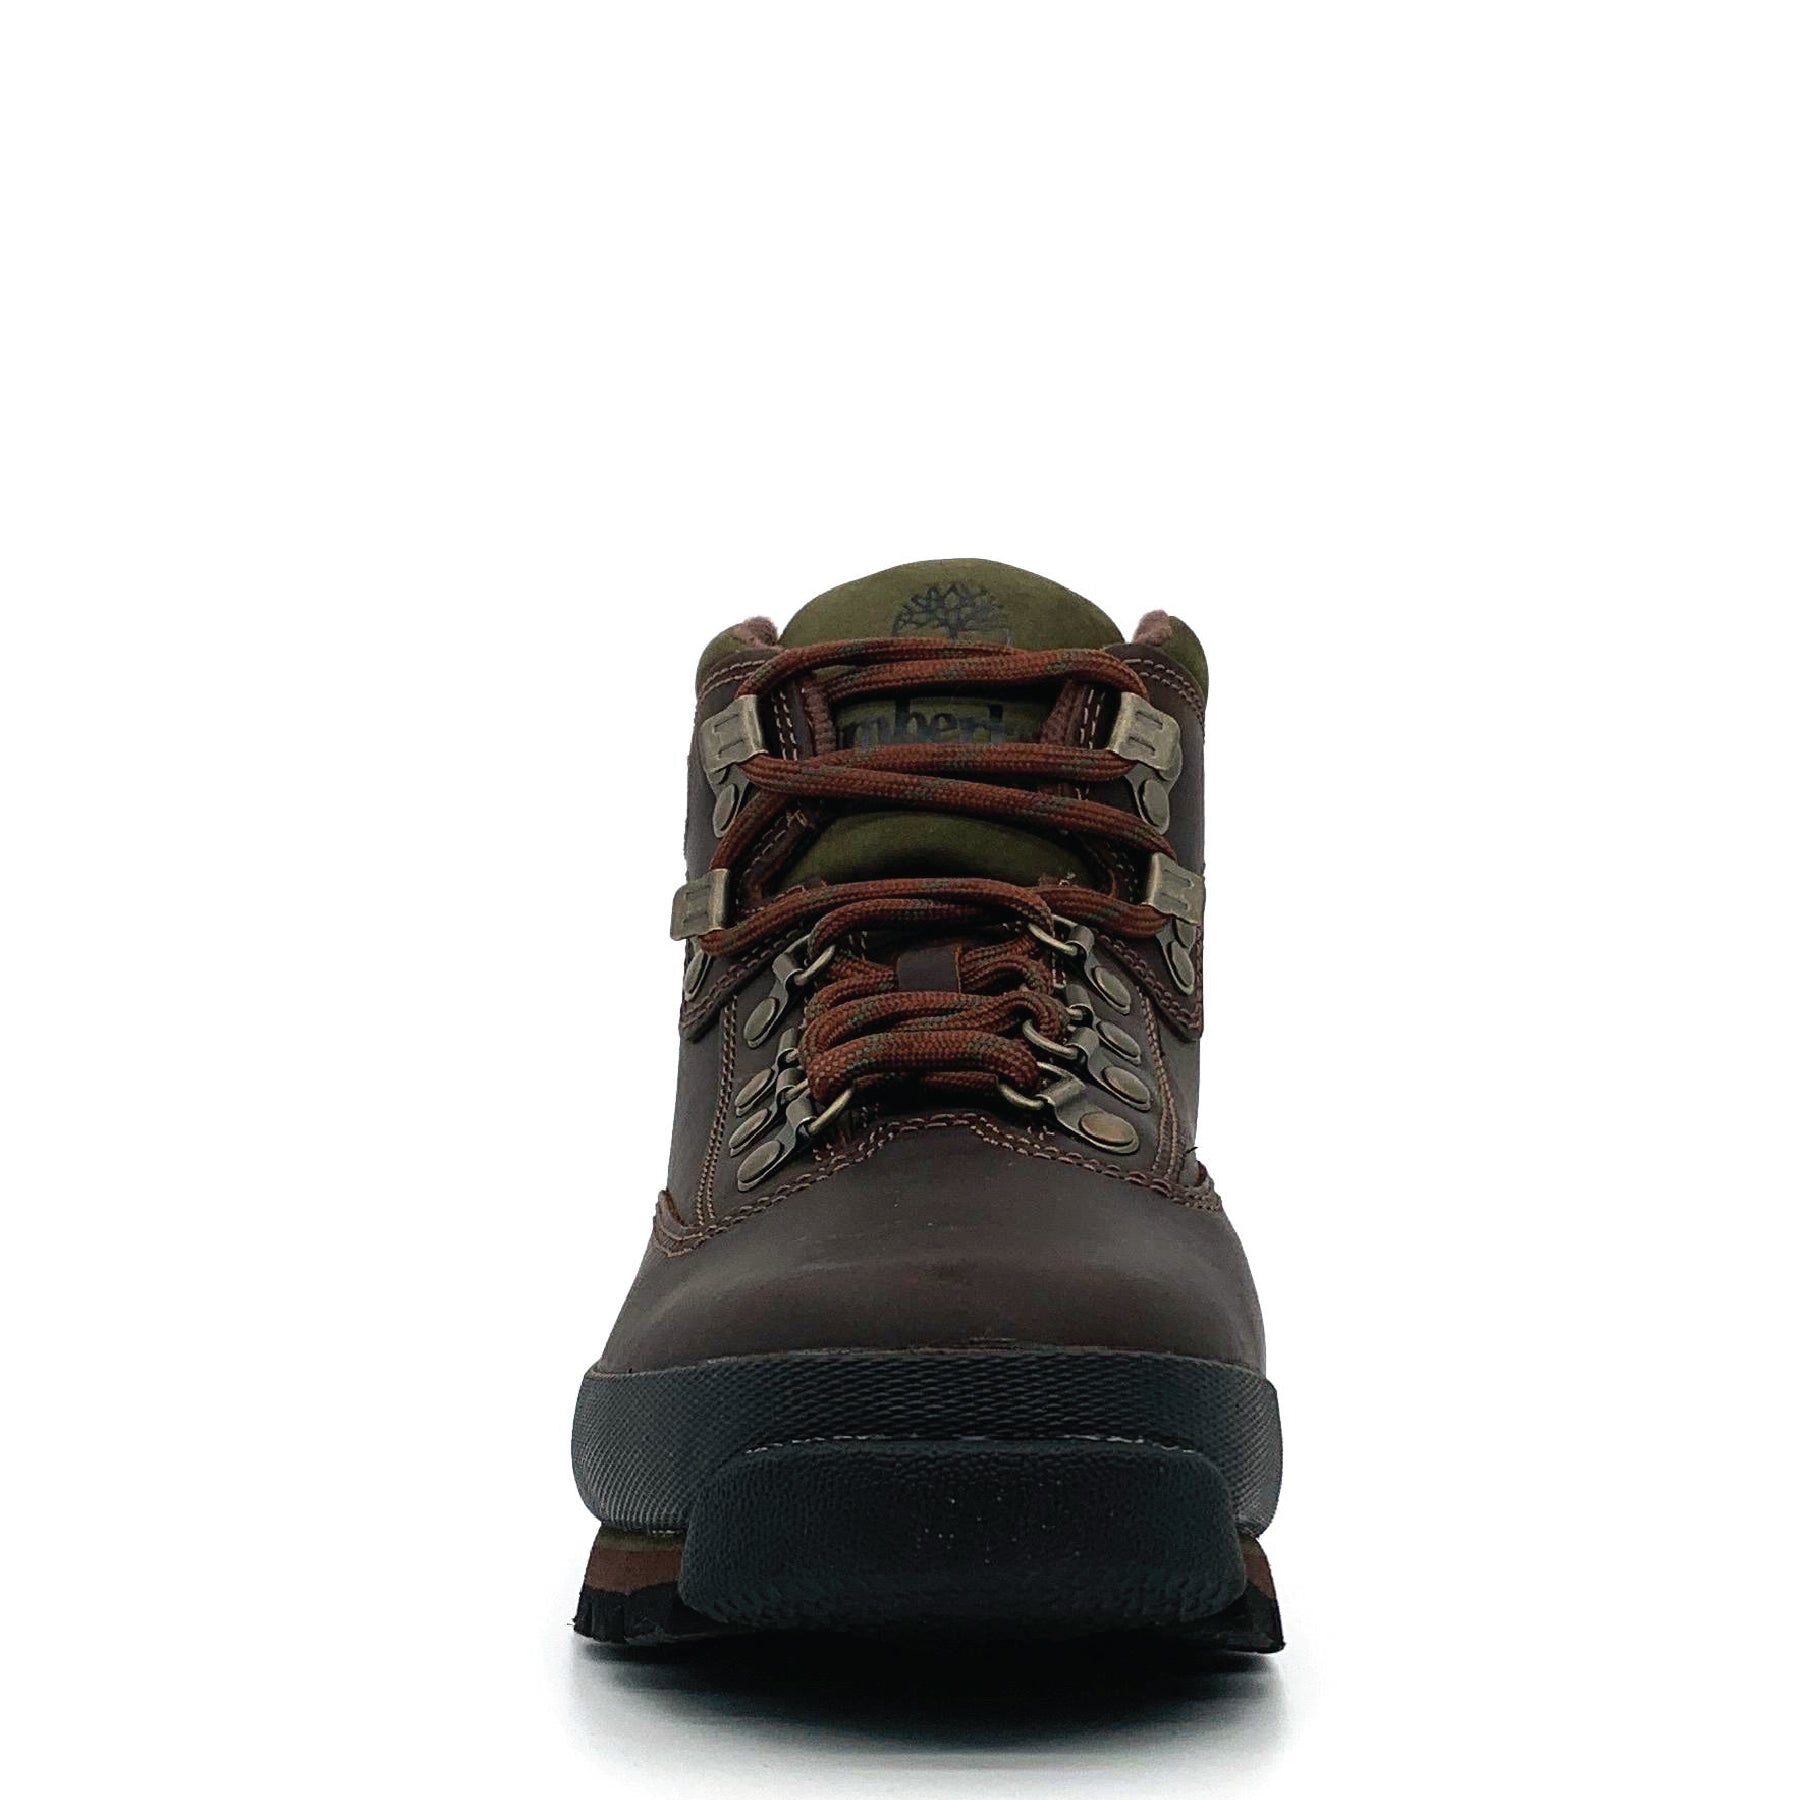 Euro Hiker Better Leather Brown